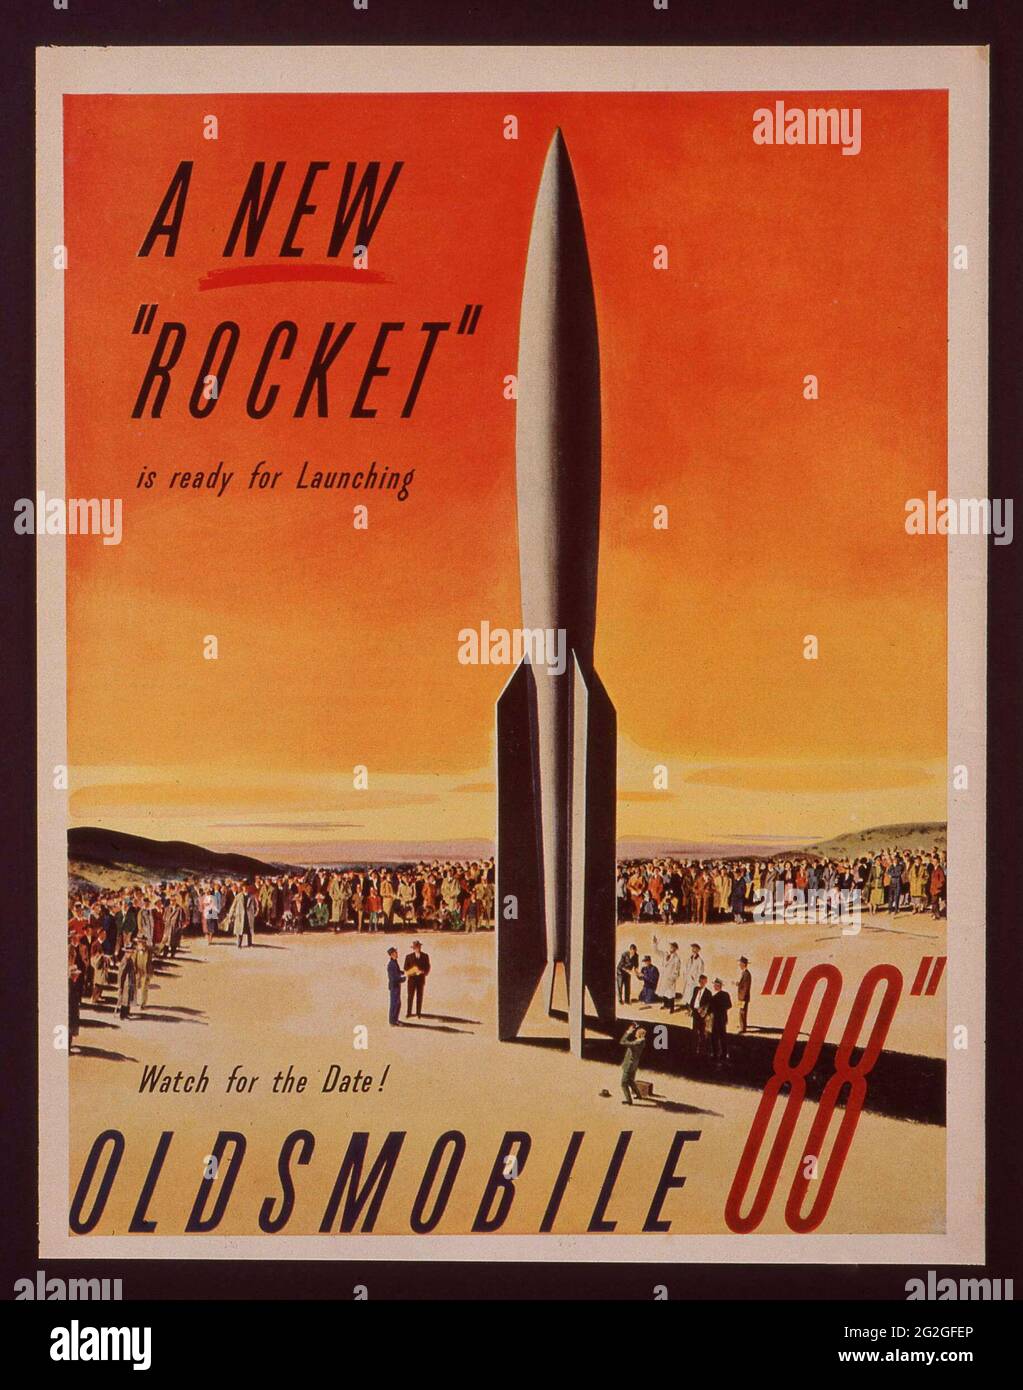 'A New Rocket is Ready for Launching' Oldsmobile 88 vintage magazine advertisement, 1951. Stock Photo